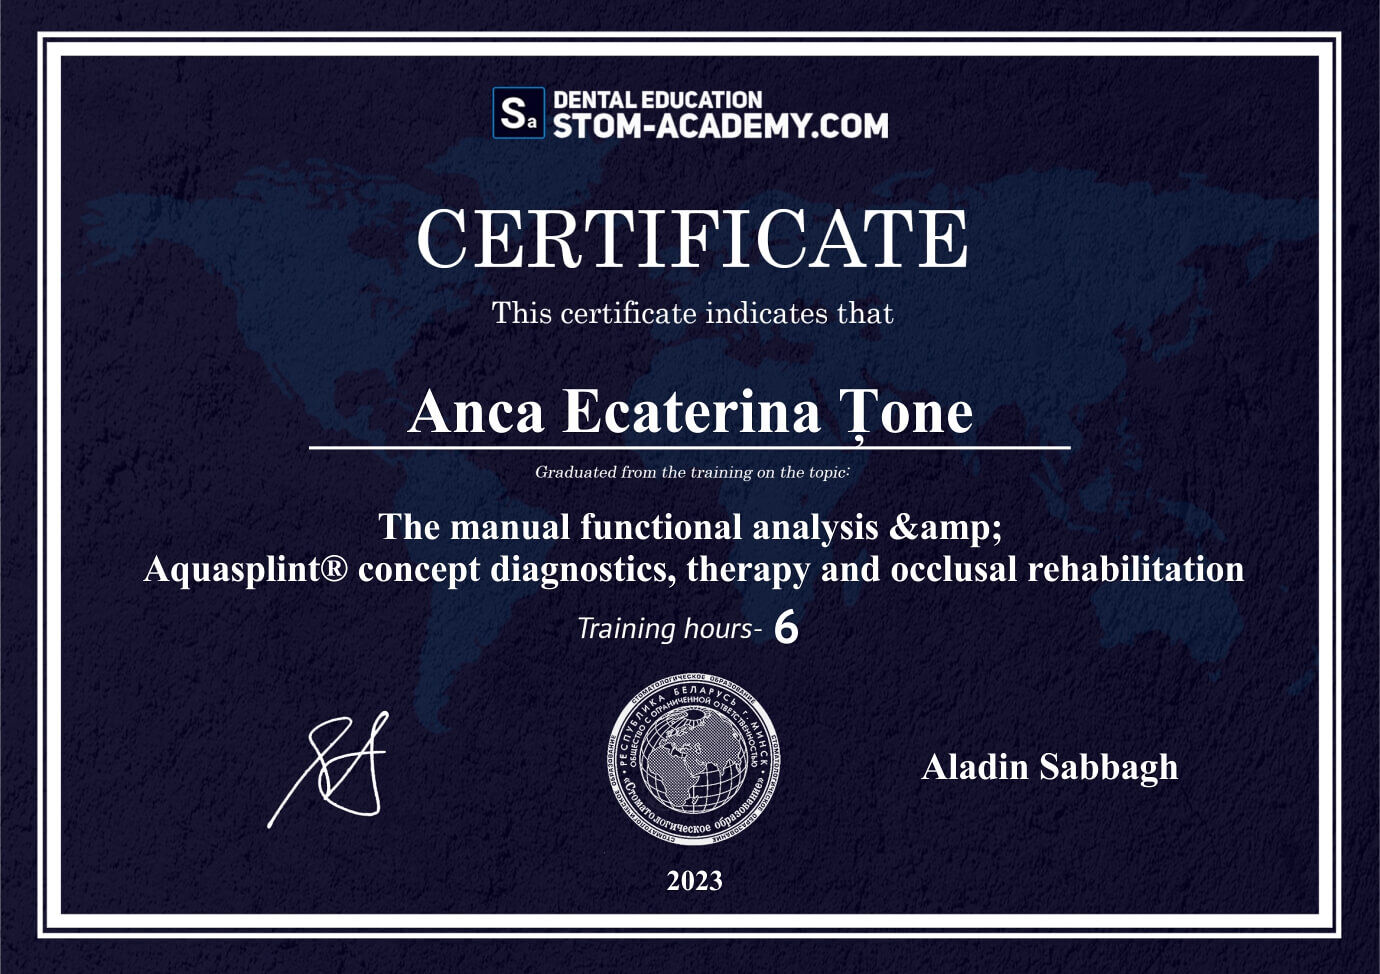 Certificate - The manual functional analysis and amp